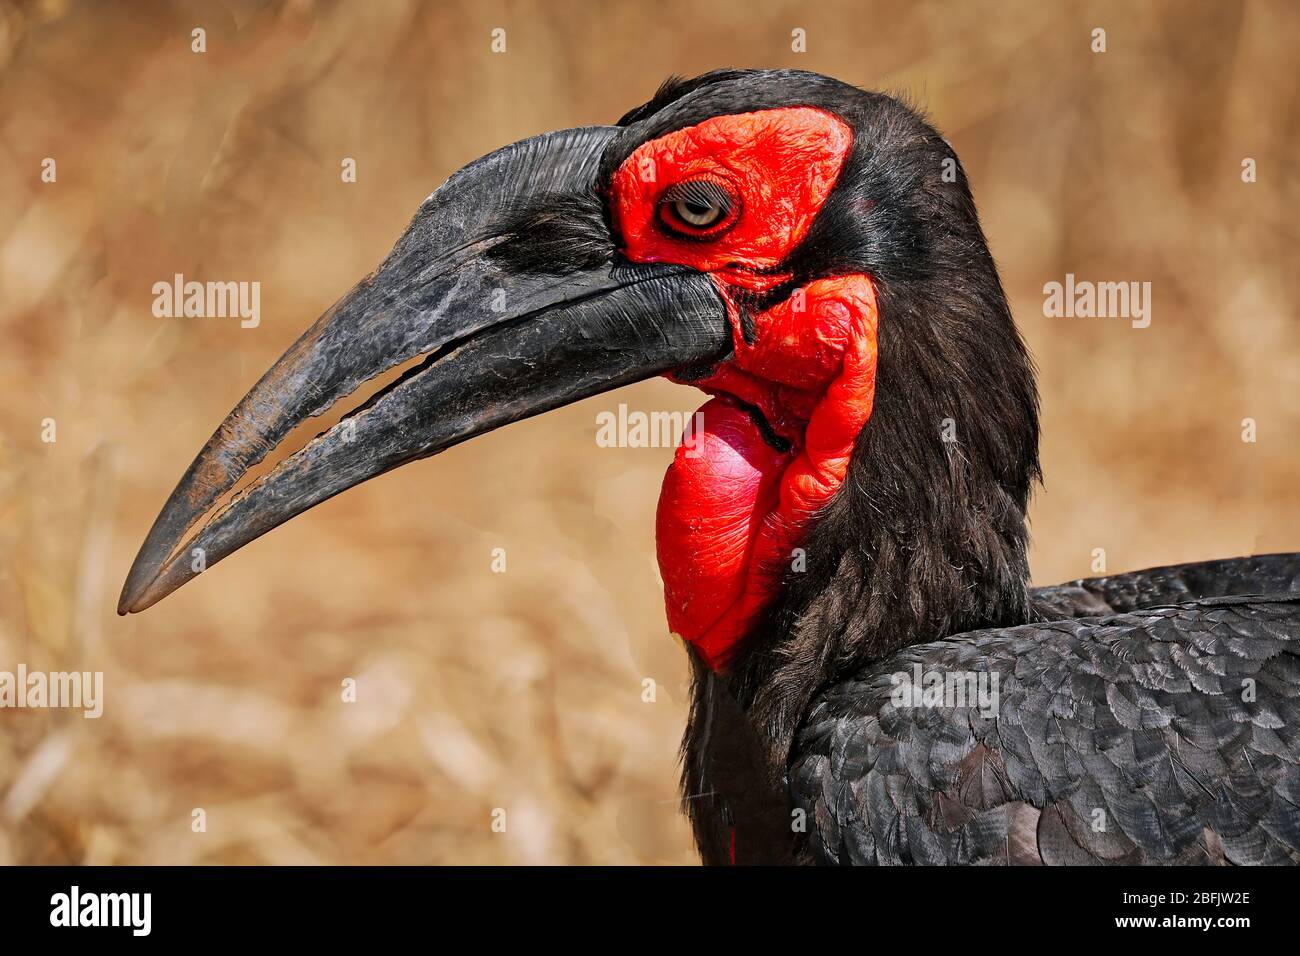 Southern ground hornbill, Kruger NP, South Africa Stock Photo